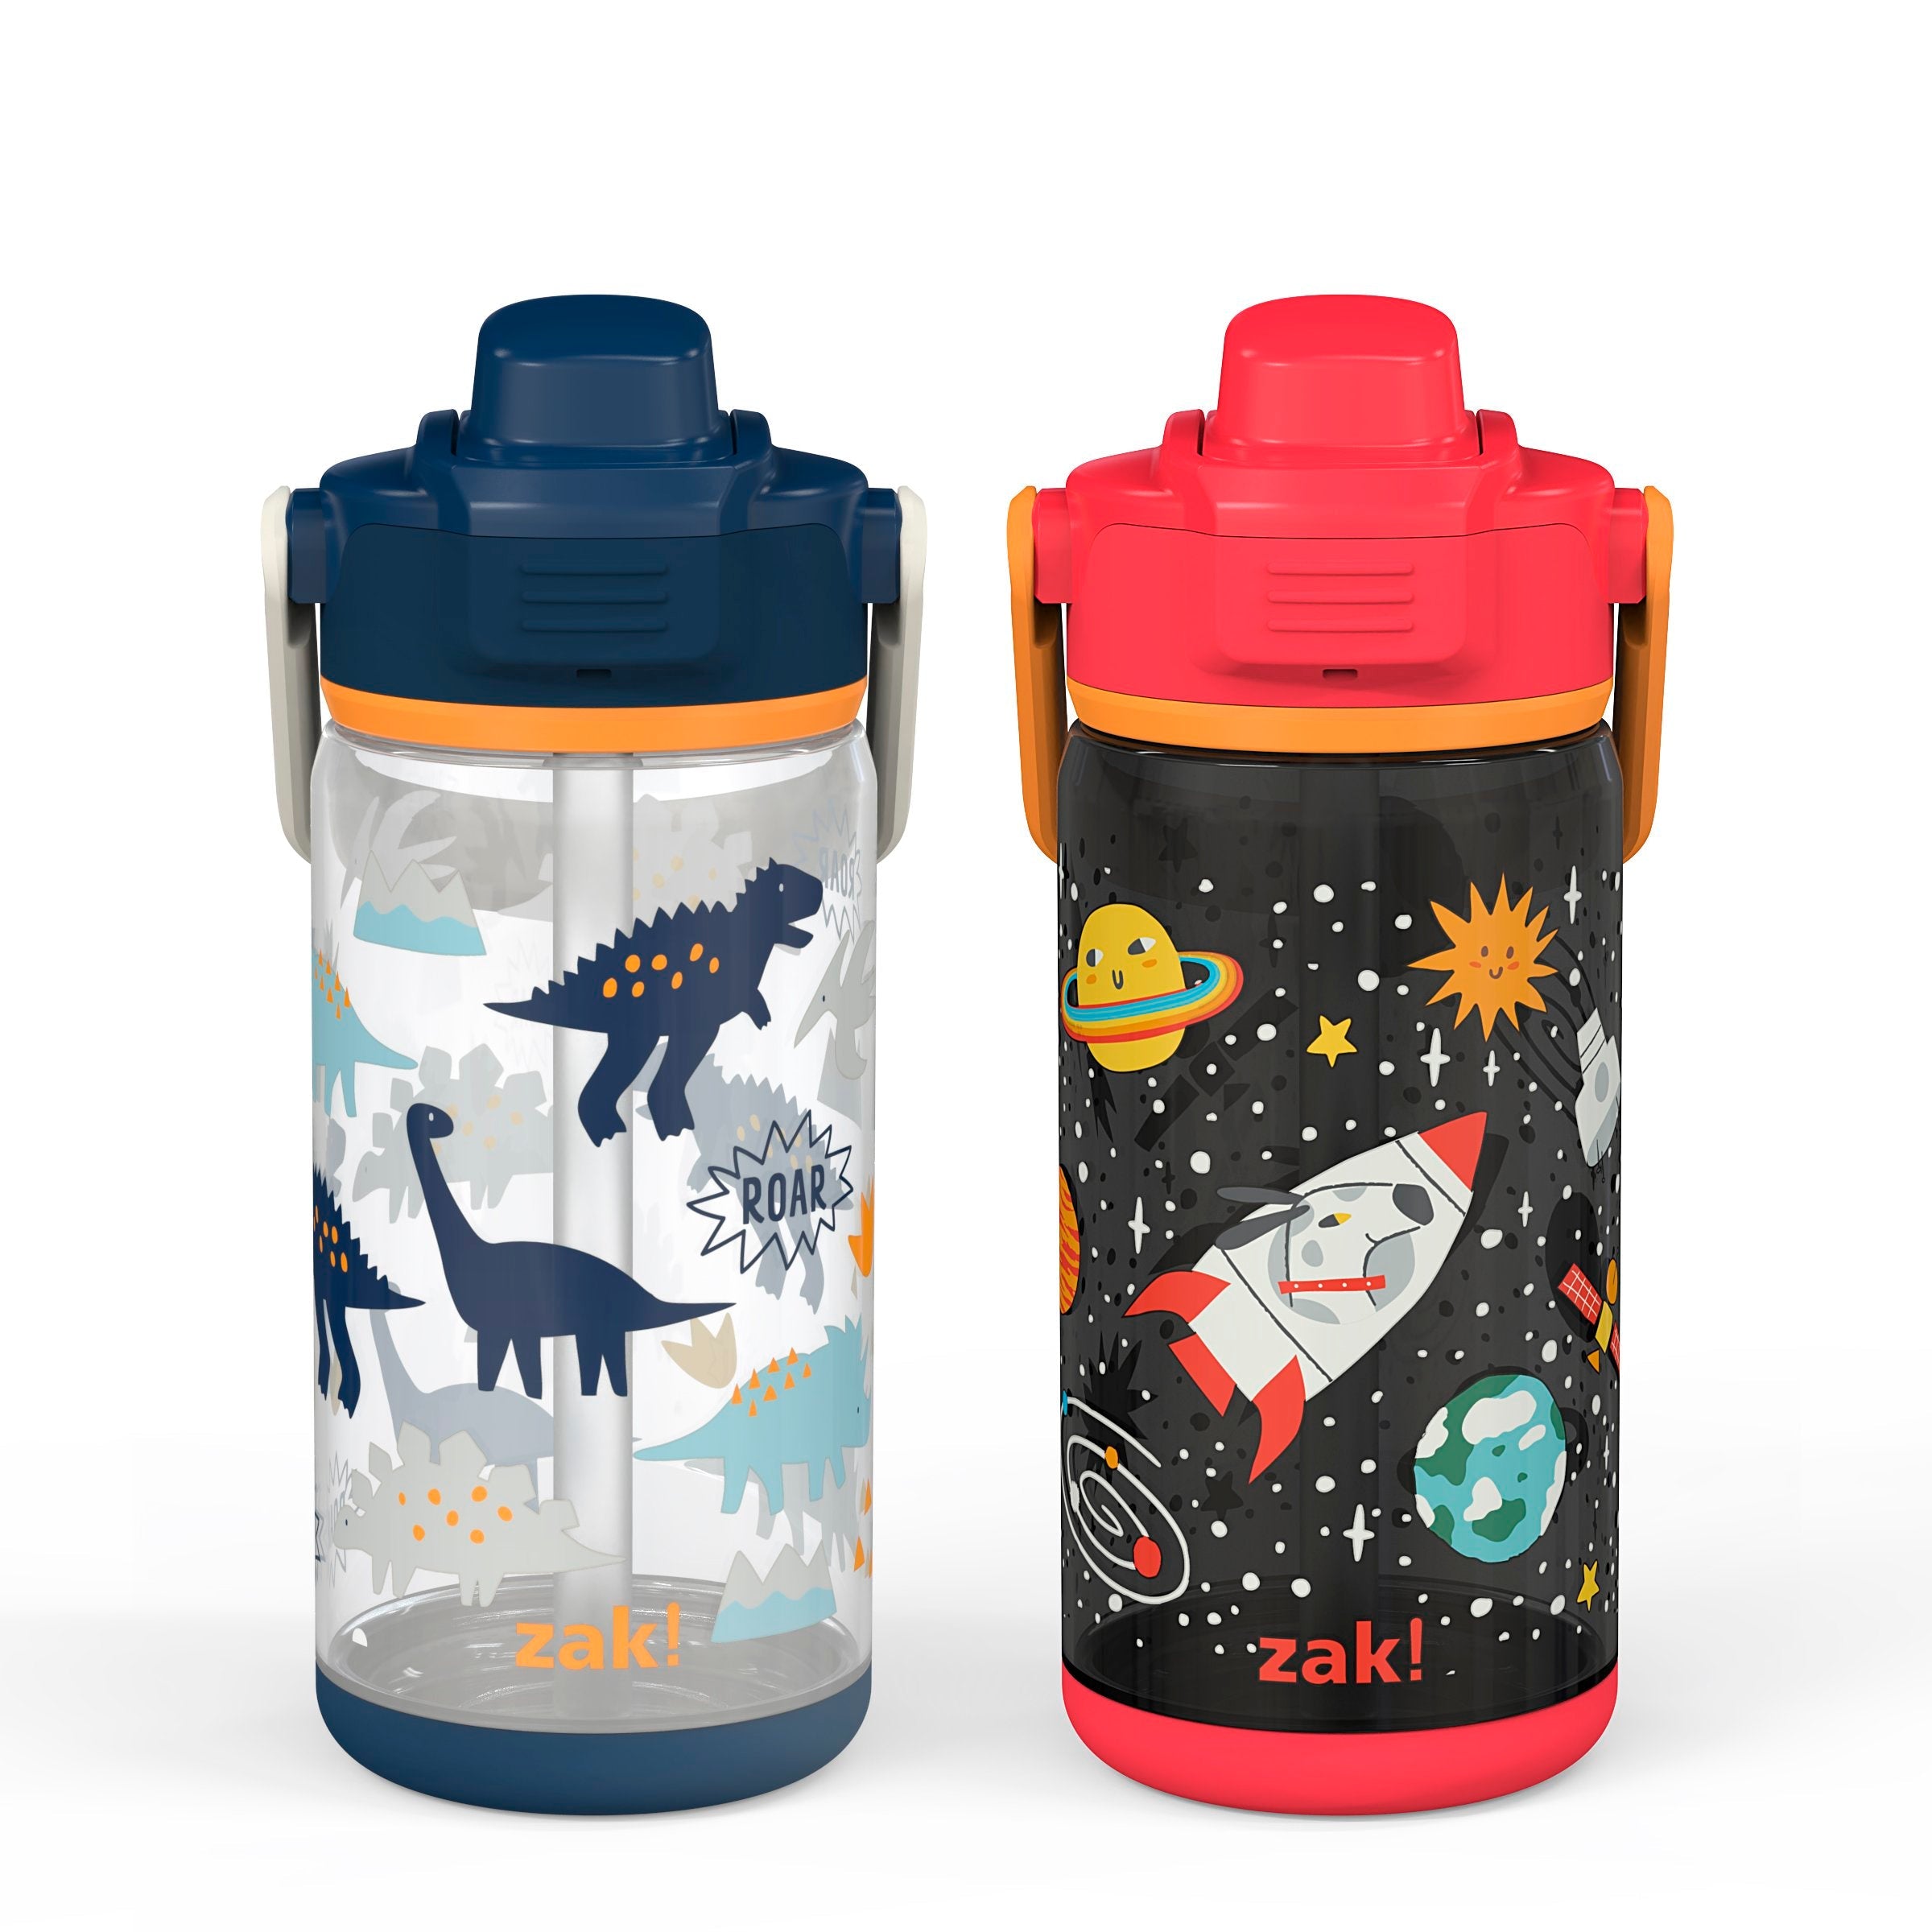 Zak Designs 16oz Plastic Kids' Water Bottle with Bumper and Antimicrobial Spout 'Spaceships-Zaksaurus